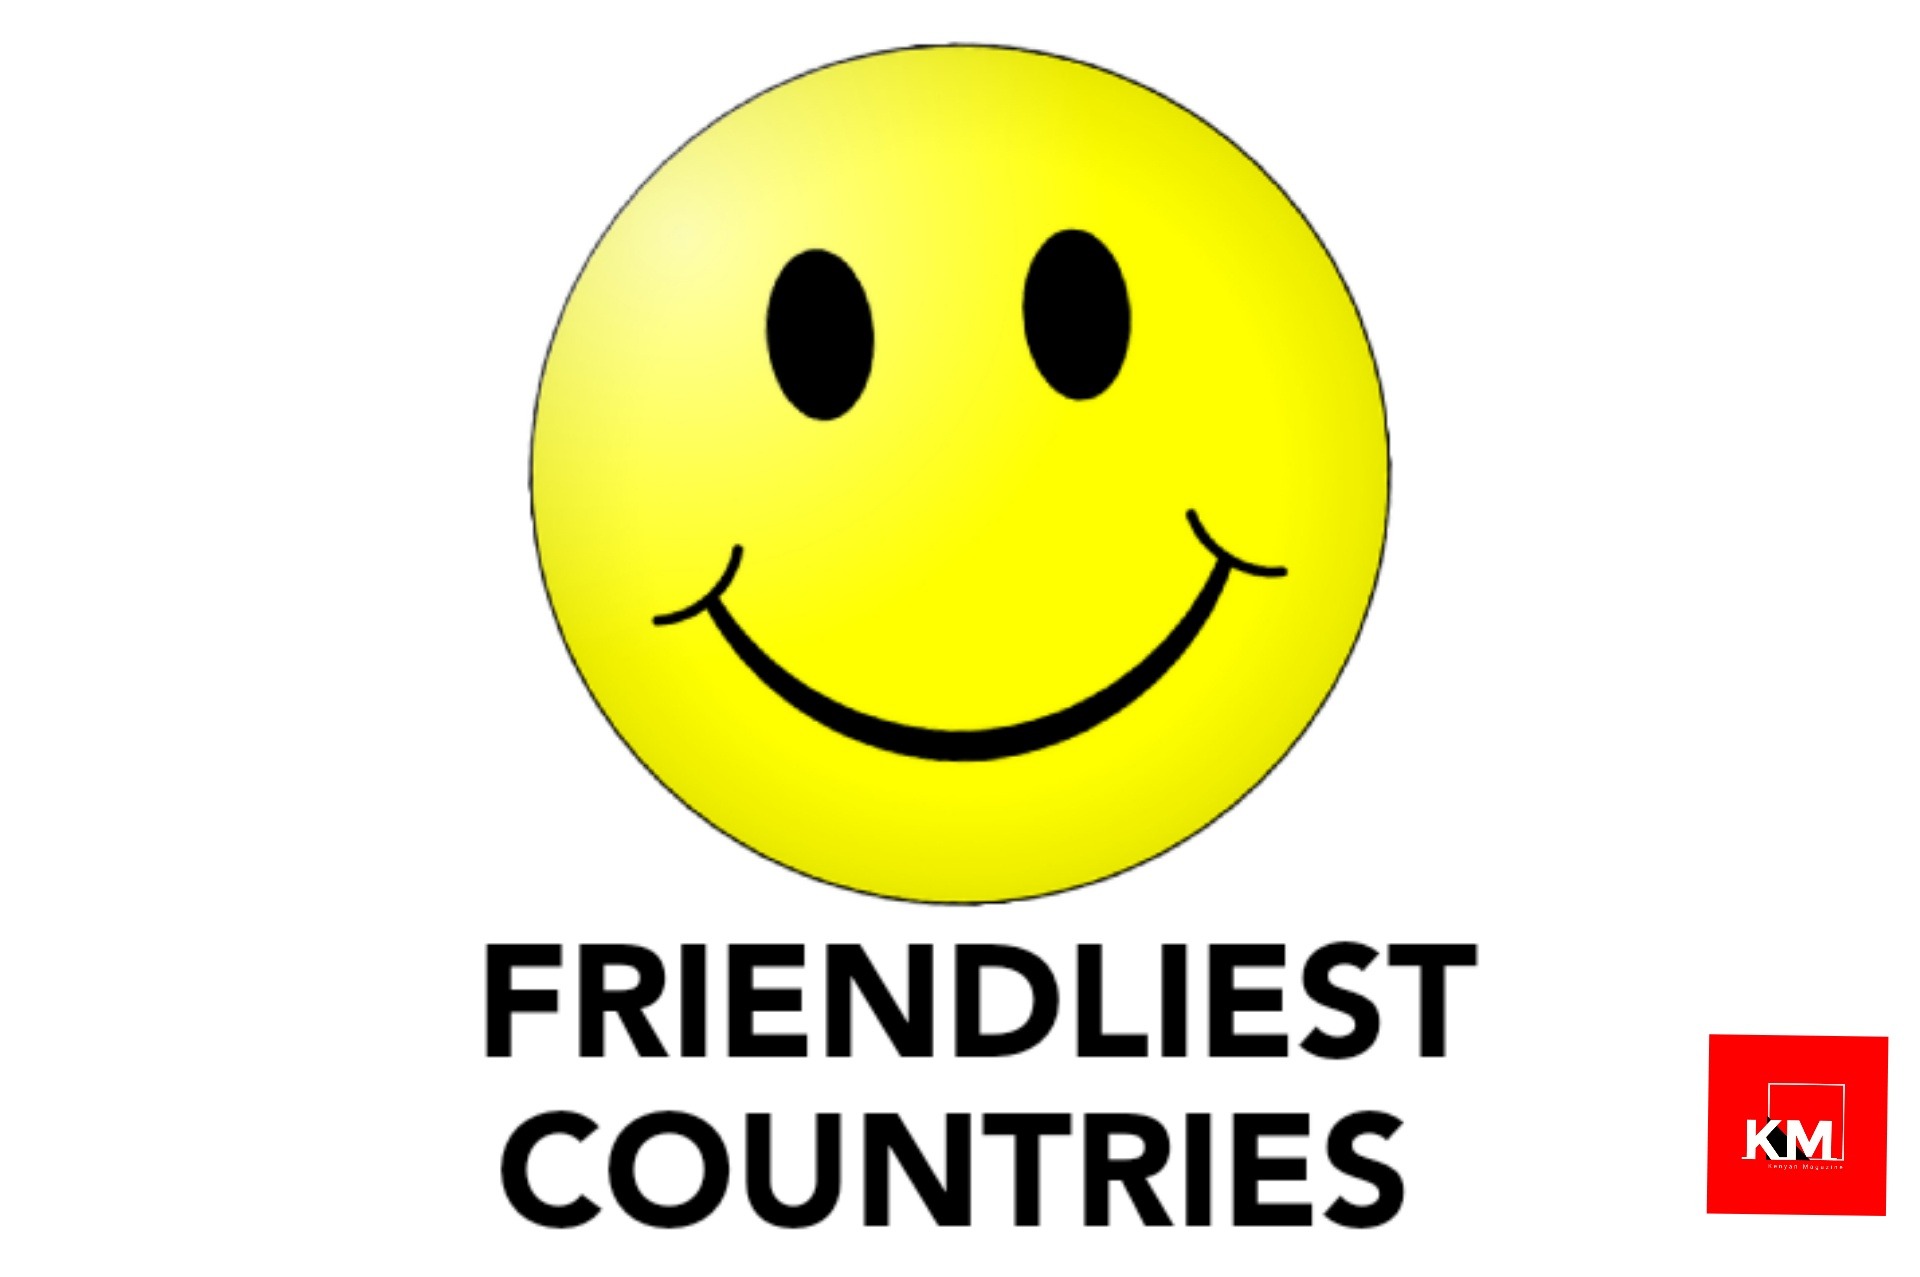 Friendly Countries